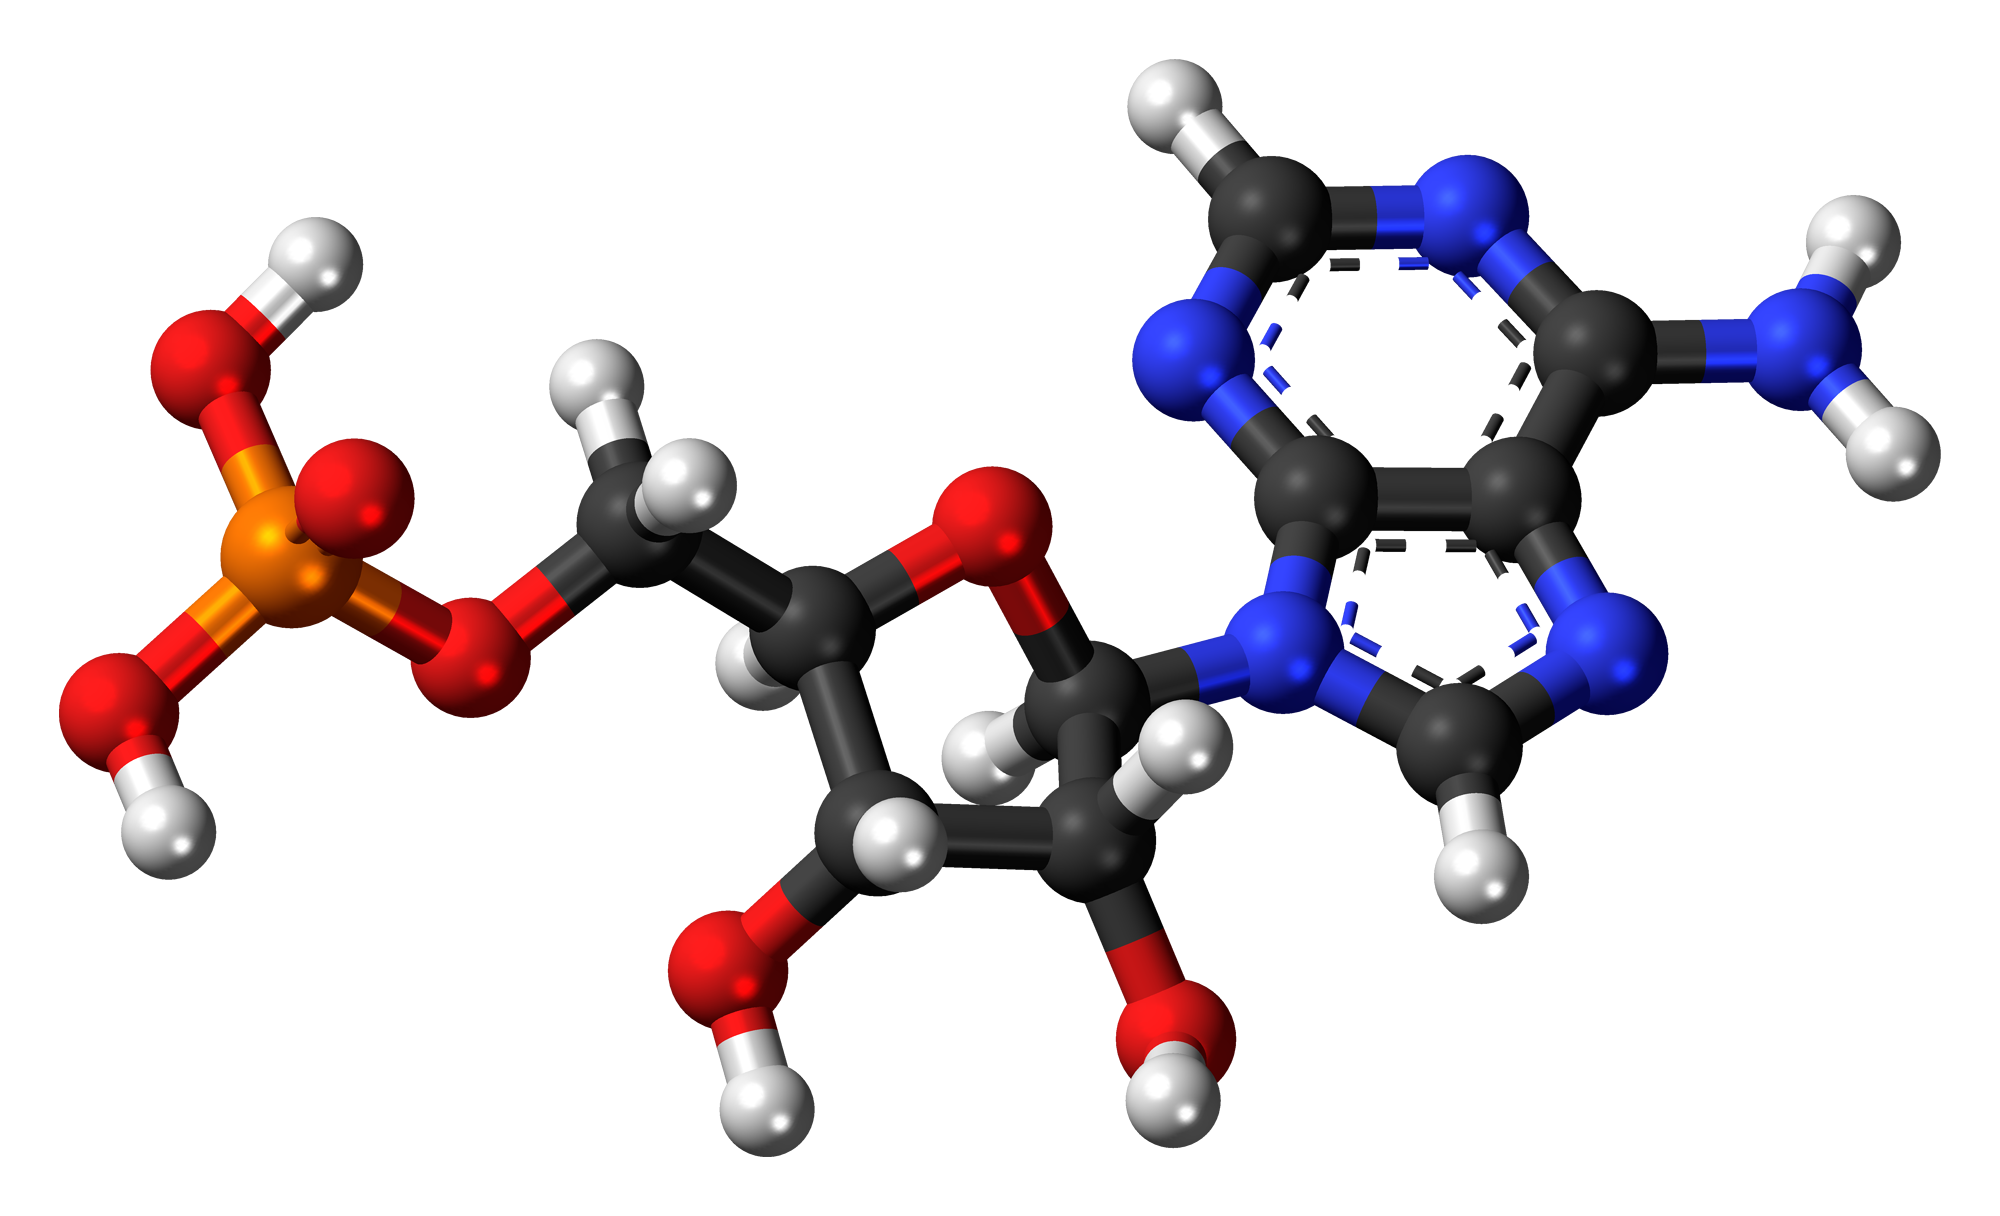 Adenosine monophosphate also contains some oxygen atoms (red) and a phosphorous atom (yellow). It is not alive.